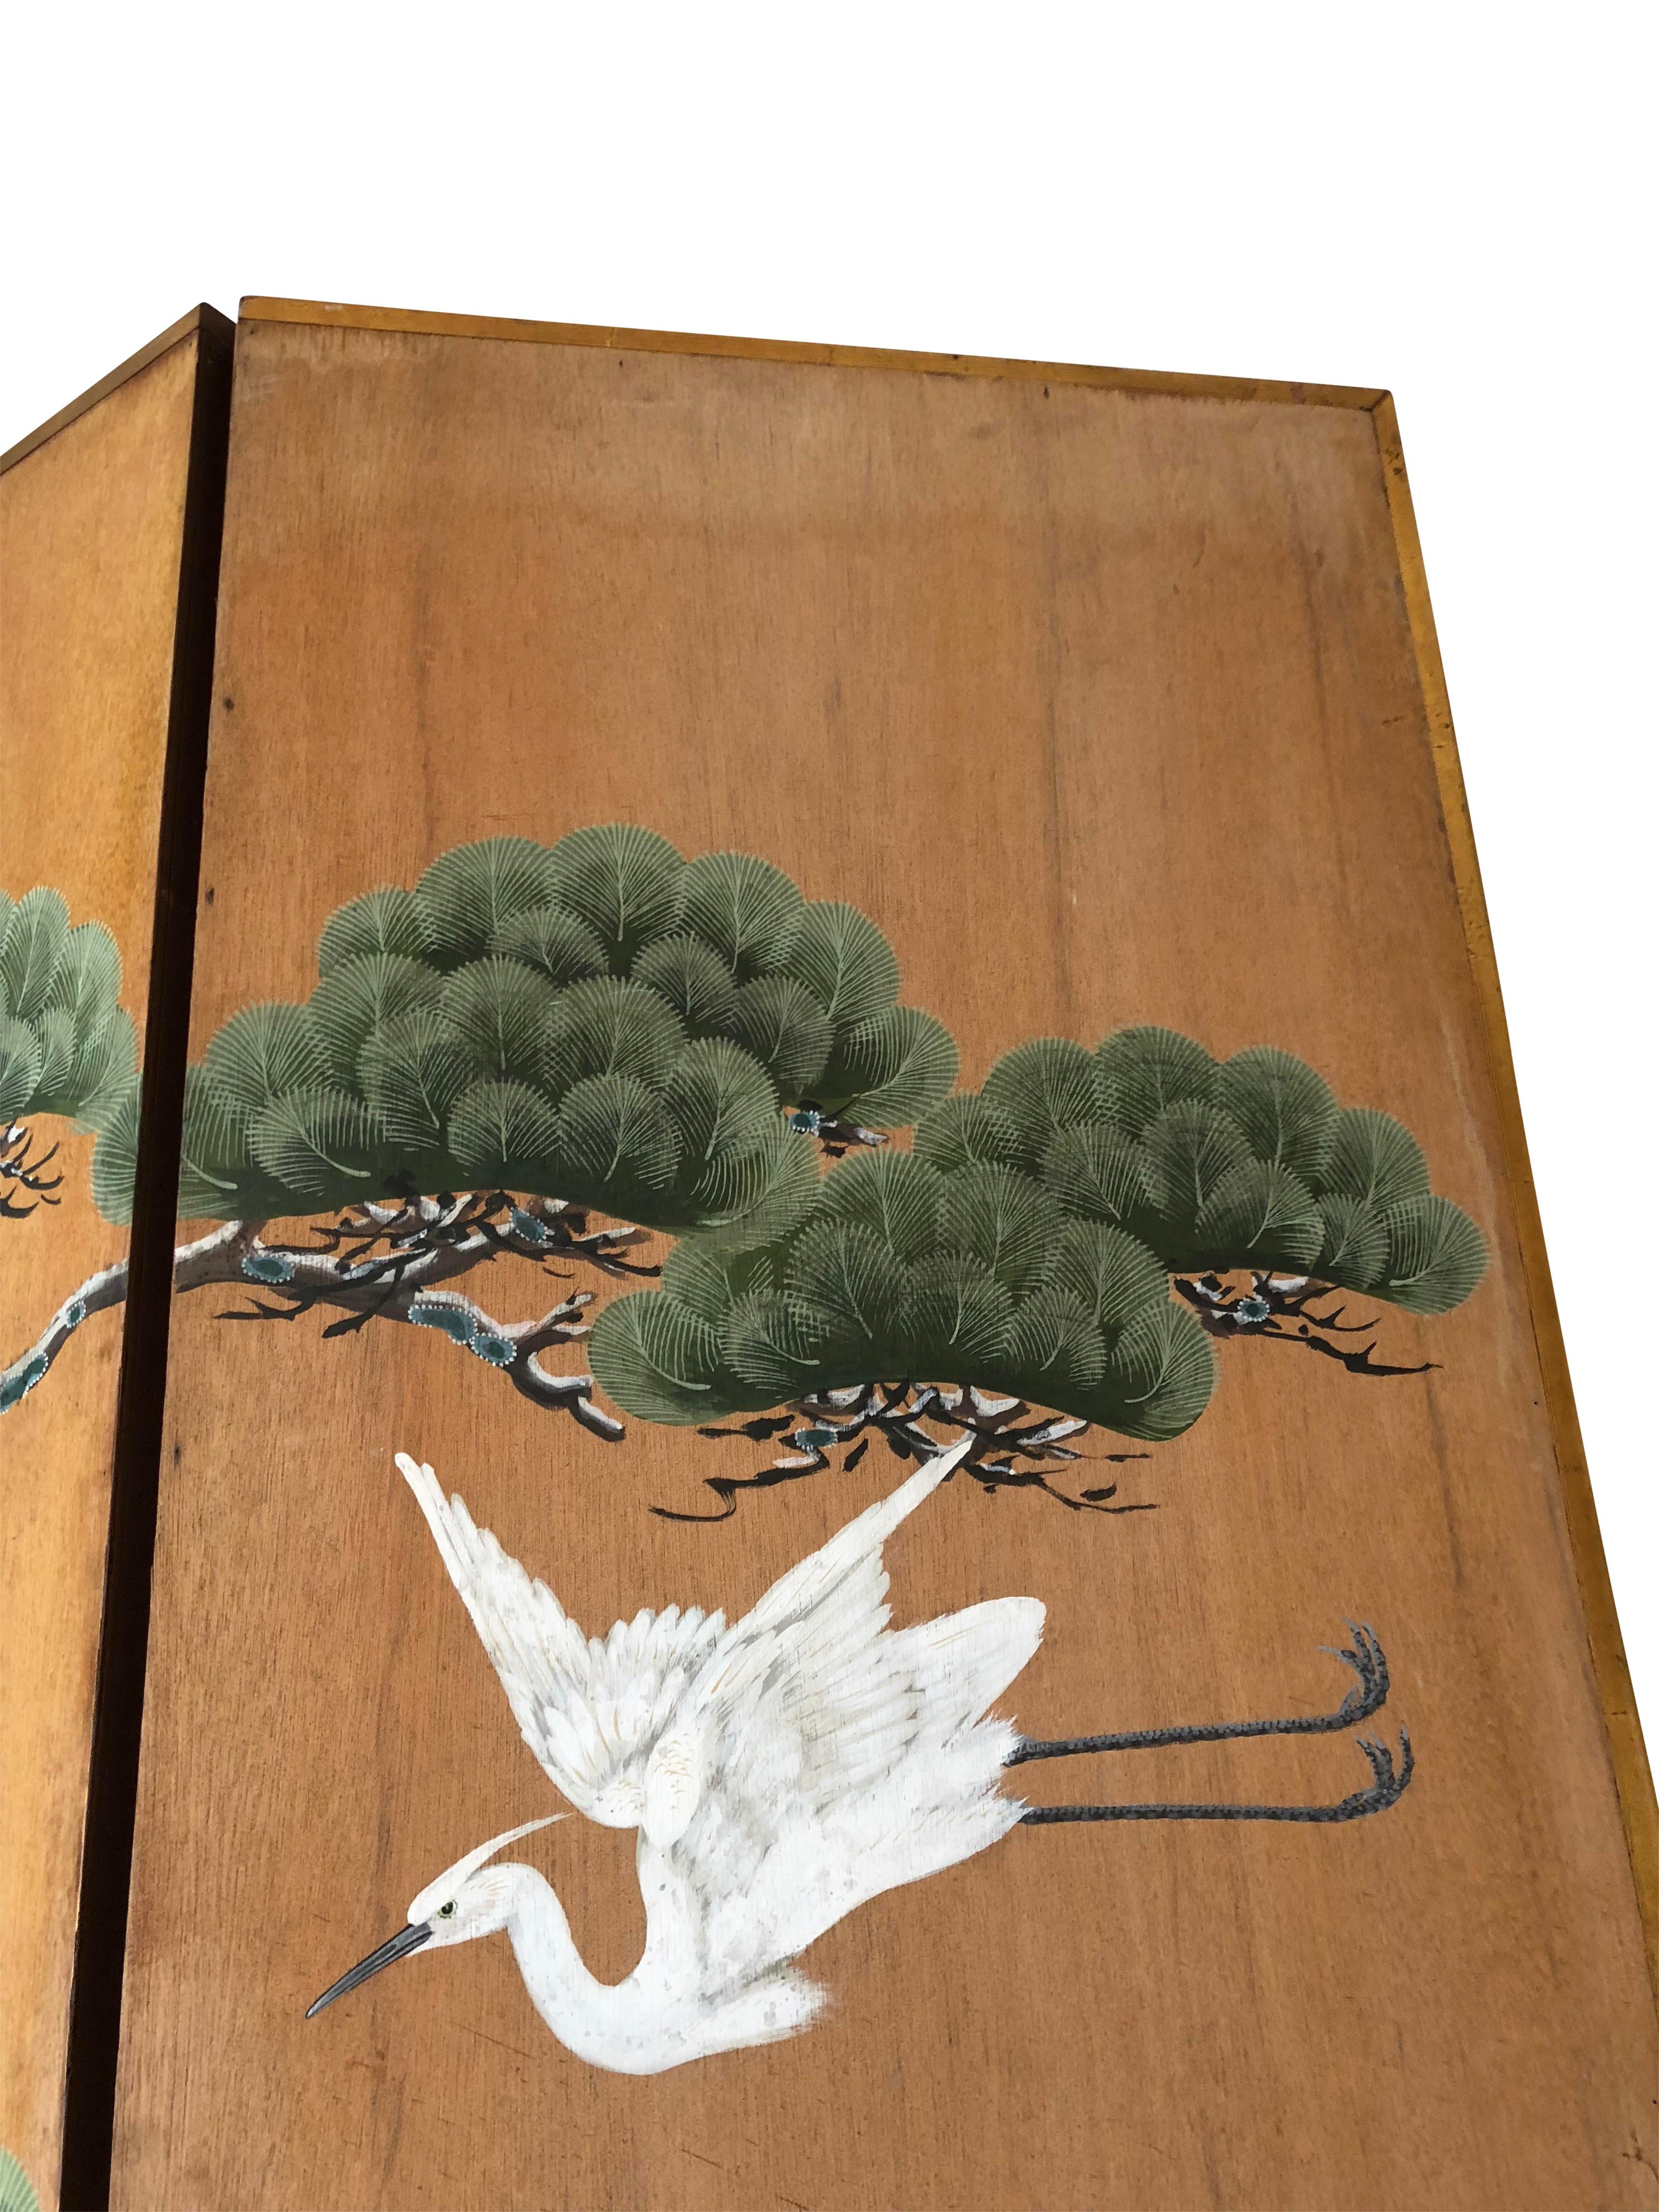 Hand-Painted Japanese Inspired Screen by Artist Robert Crowder For Sale 2